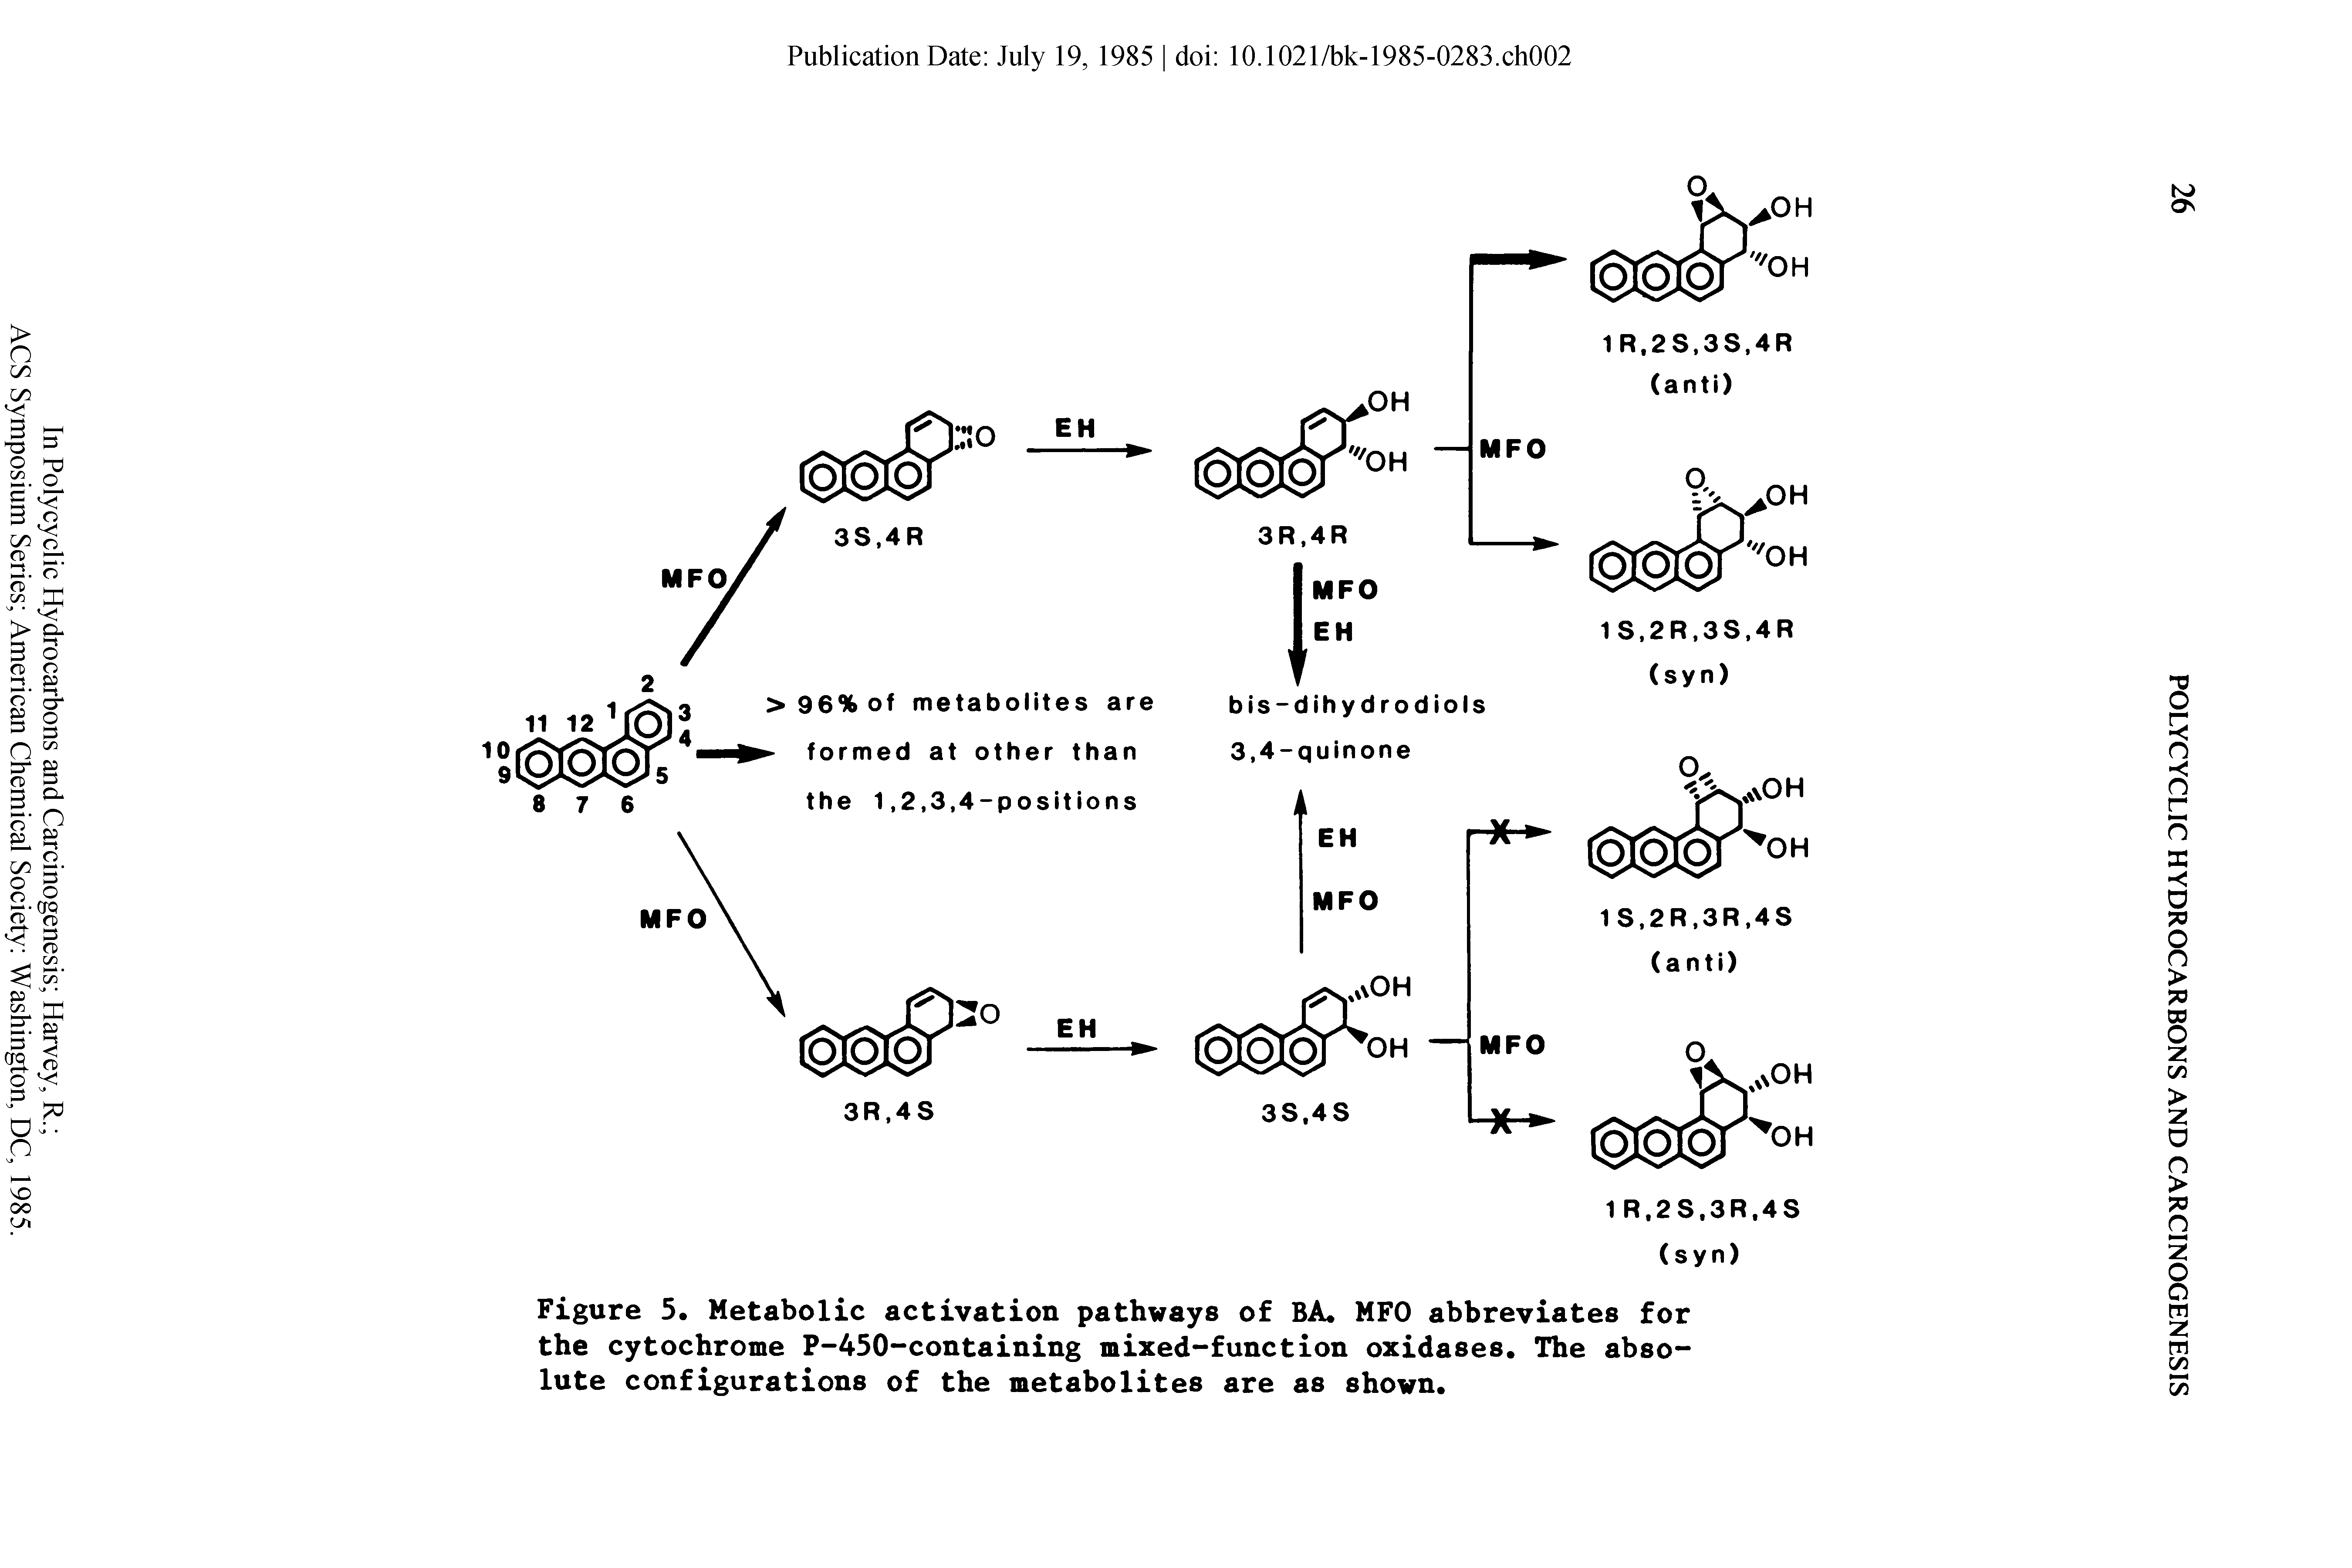 Figure 5. Metabolic activation pathways of BA. MFO abbreviates for the cytochrome P-450-containing mixed-function oxidases. The absolute configurations of the metabolites are as shown.